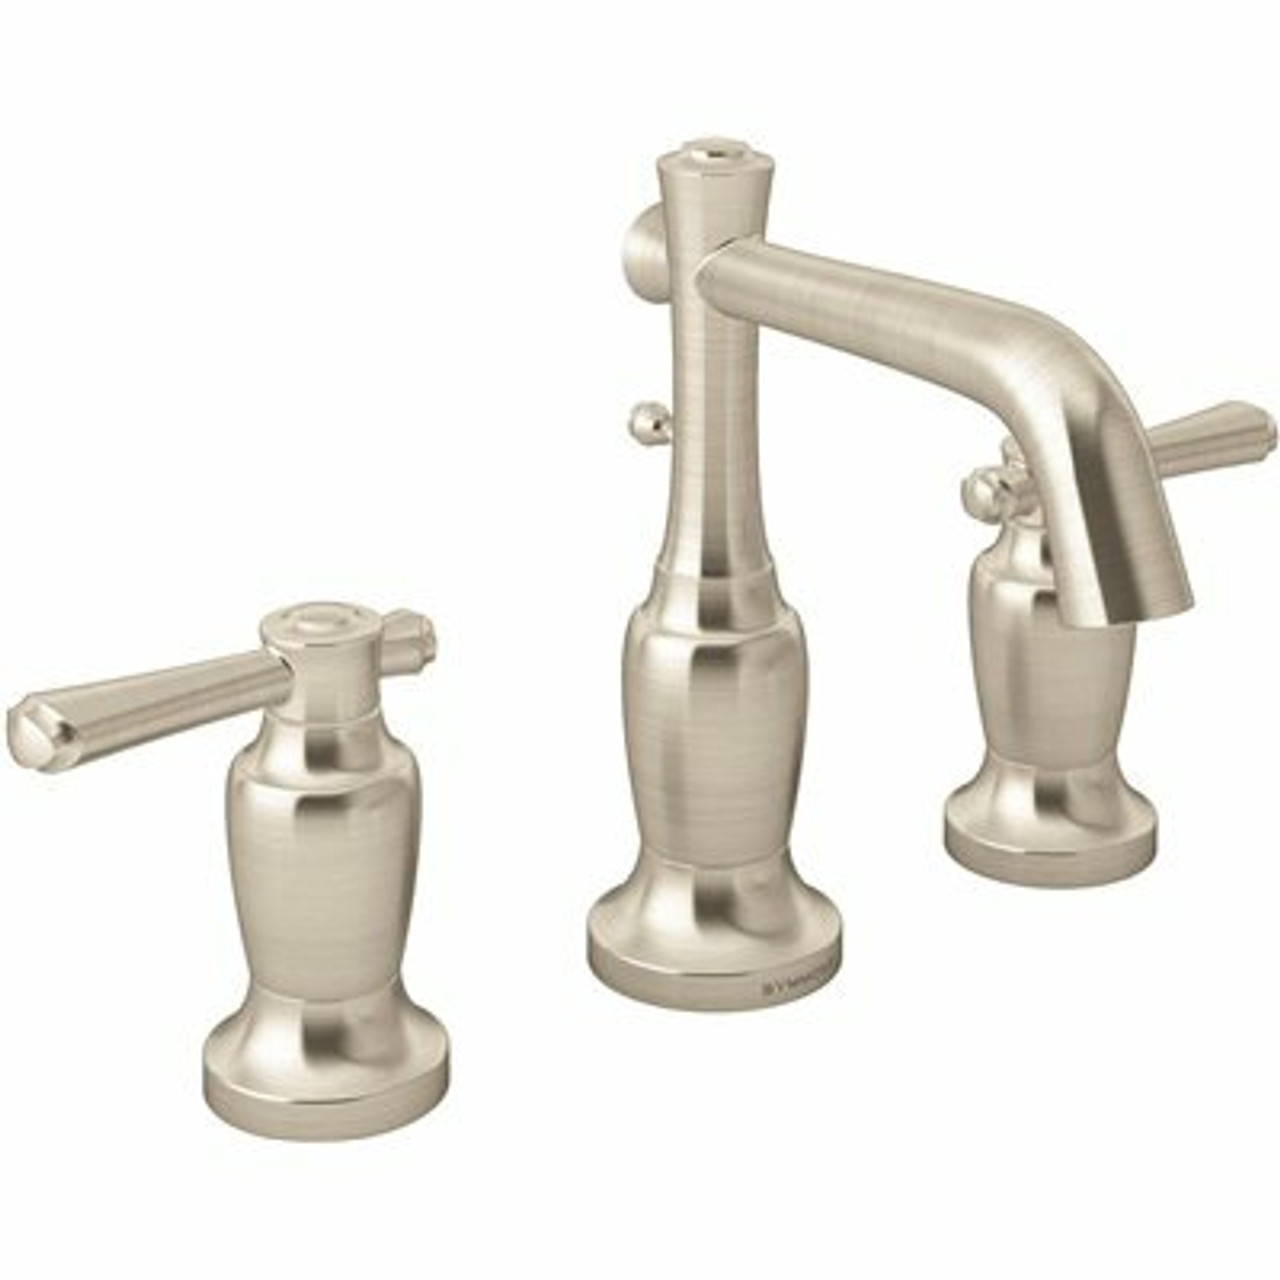 Symmons Degas 8 In. Widespread 2-Handle Low Flow Bathroom Faucet With Drain Assembly In Satin Nickel